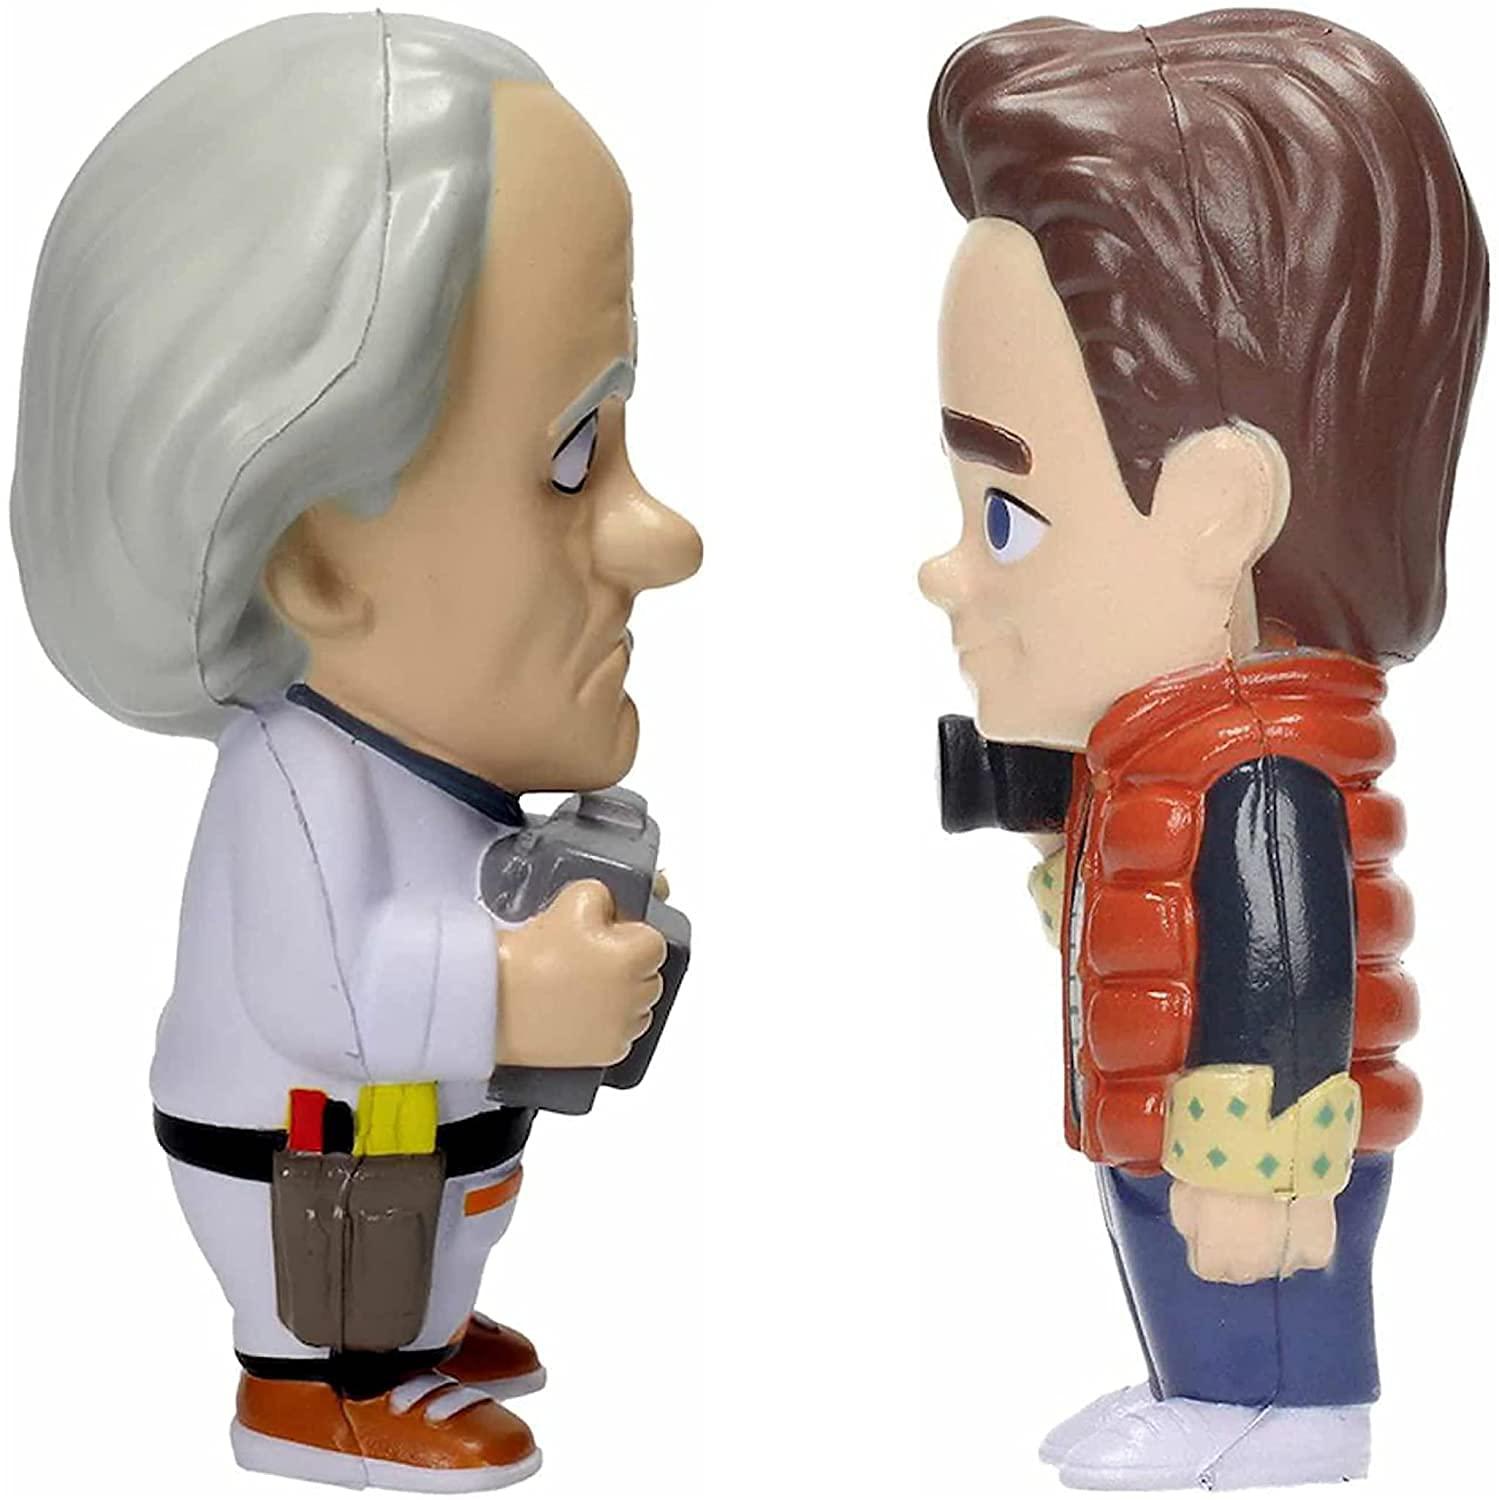 sdtoys back to the future - marty mcfly & doc brown stress dolls 15cm set of 2 6 inches